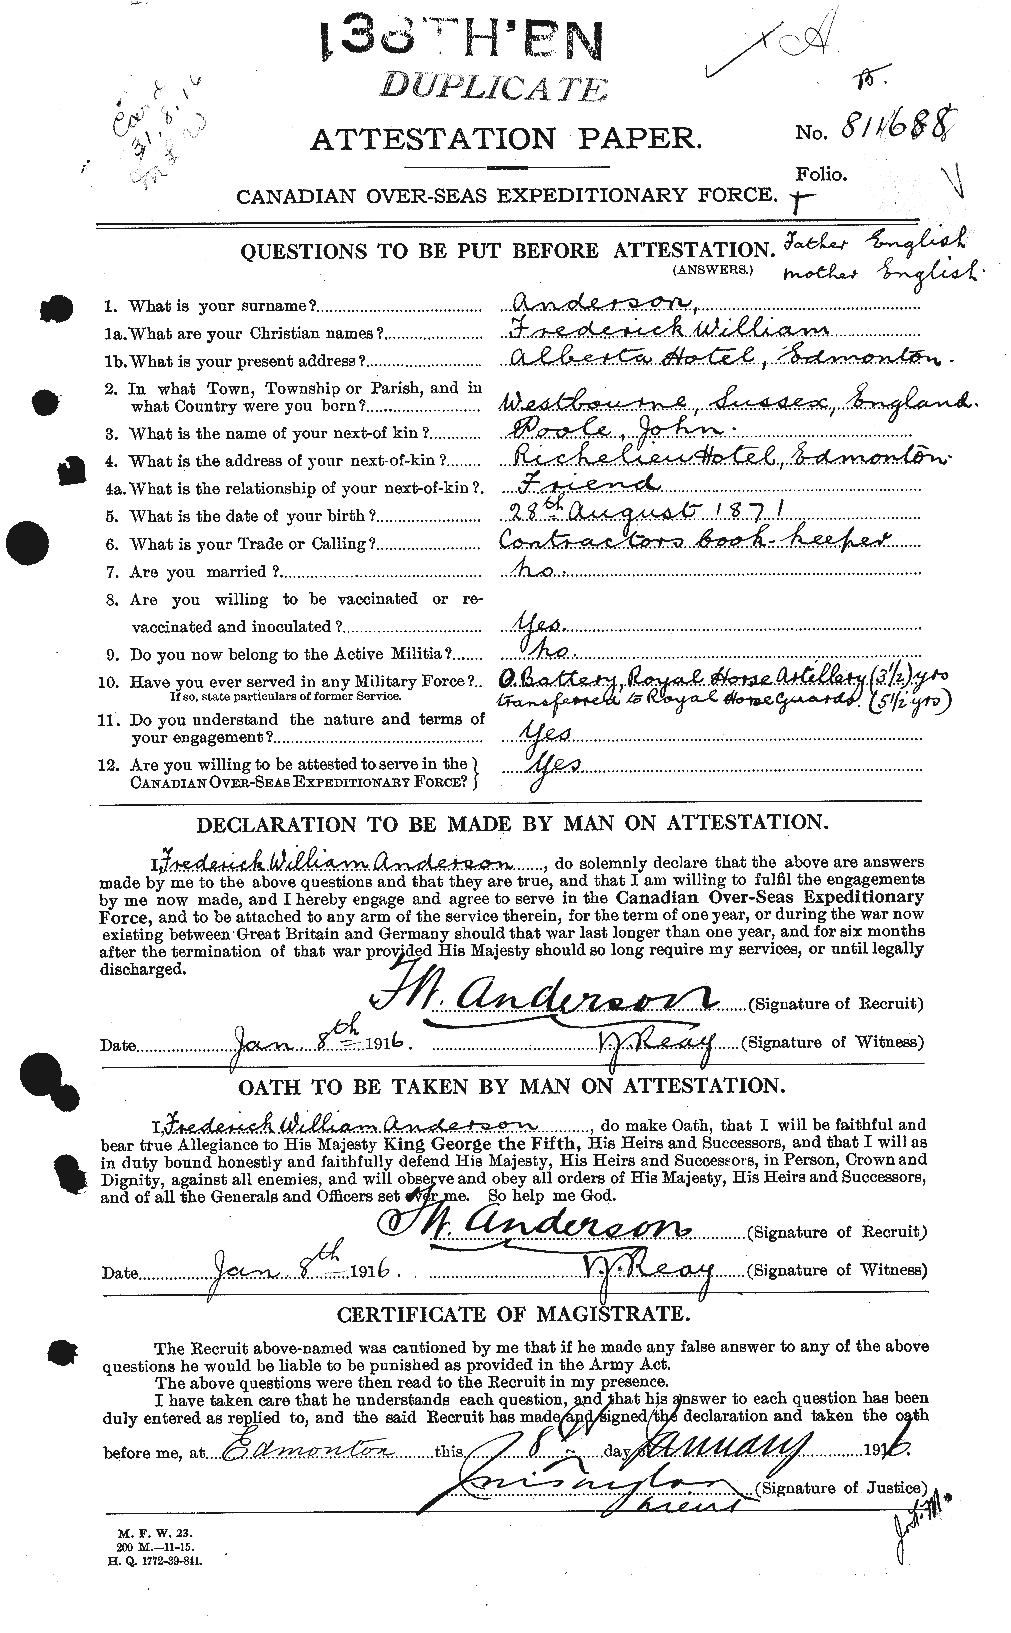 Personnel Records of the First World War - CEF 209804a